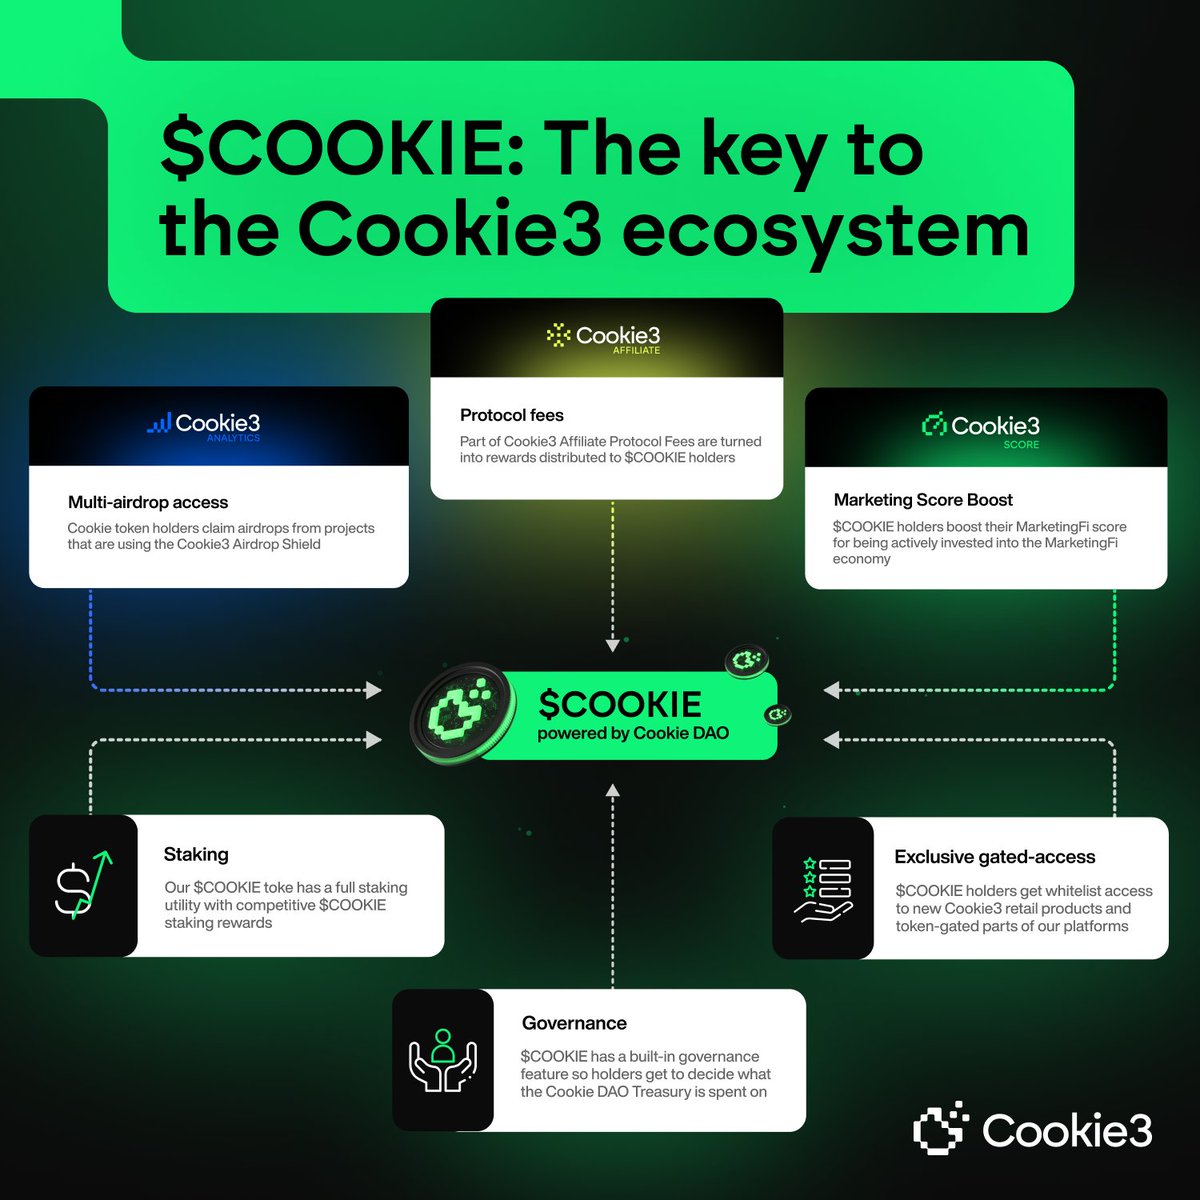 The Cookie DAO powered COOKIE token retains marketing value and distributes it to those who believe in and support the MarketingFi economy. The COOKIE token gains extra utility within the Cookie3 ecosystem. Check out how Cookie DAO powered COOKIE functions within our ecosystem